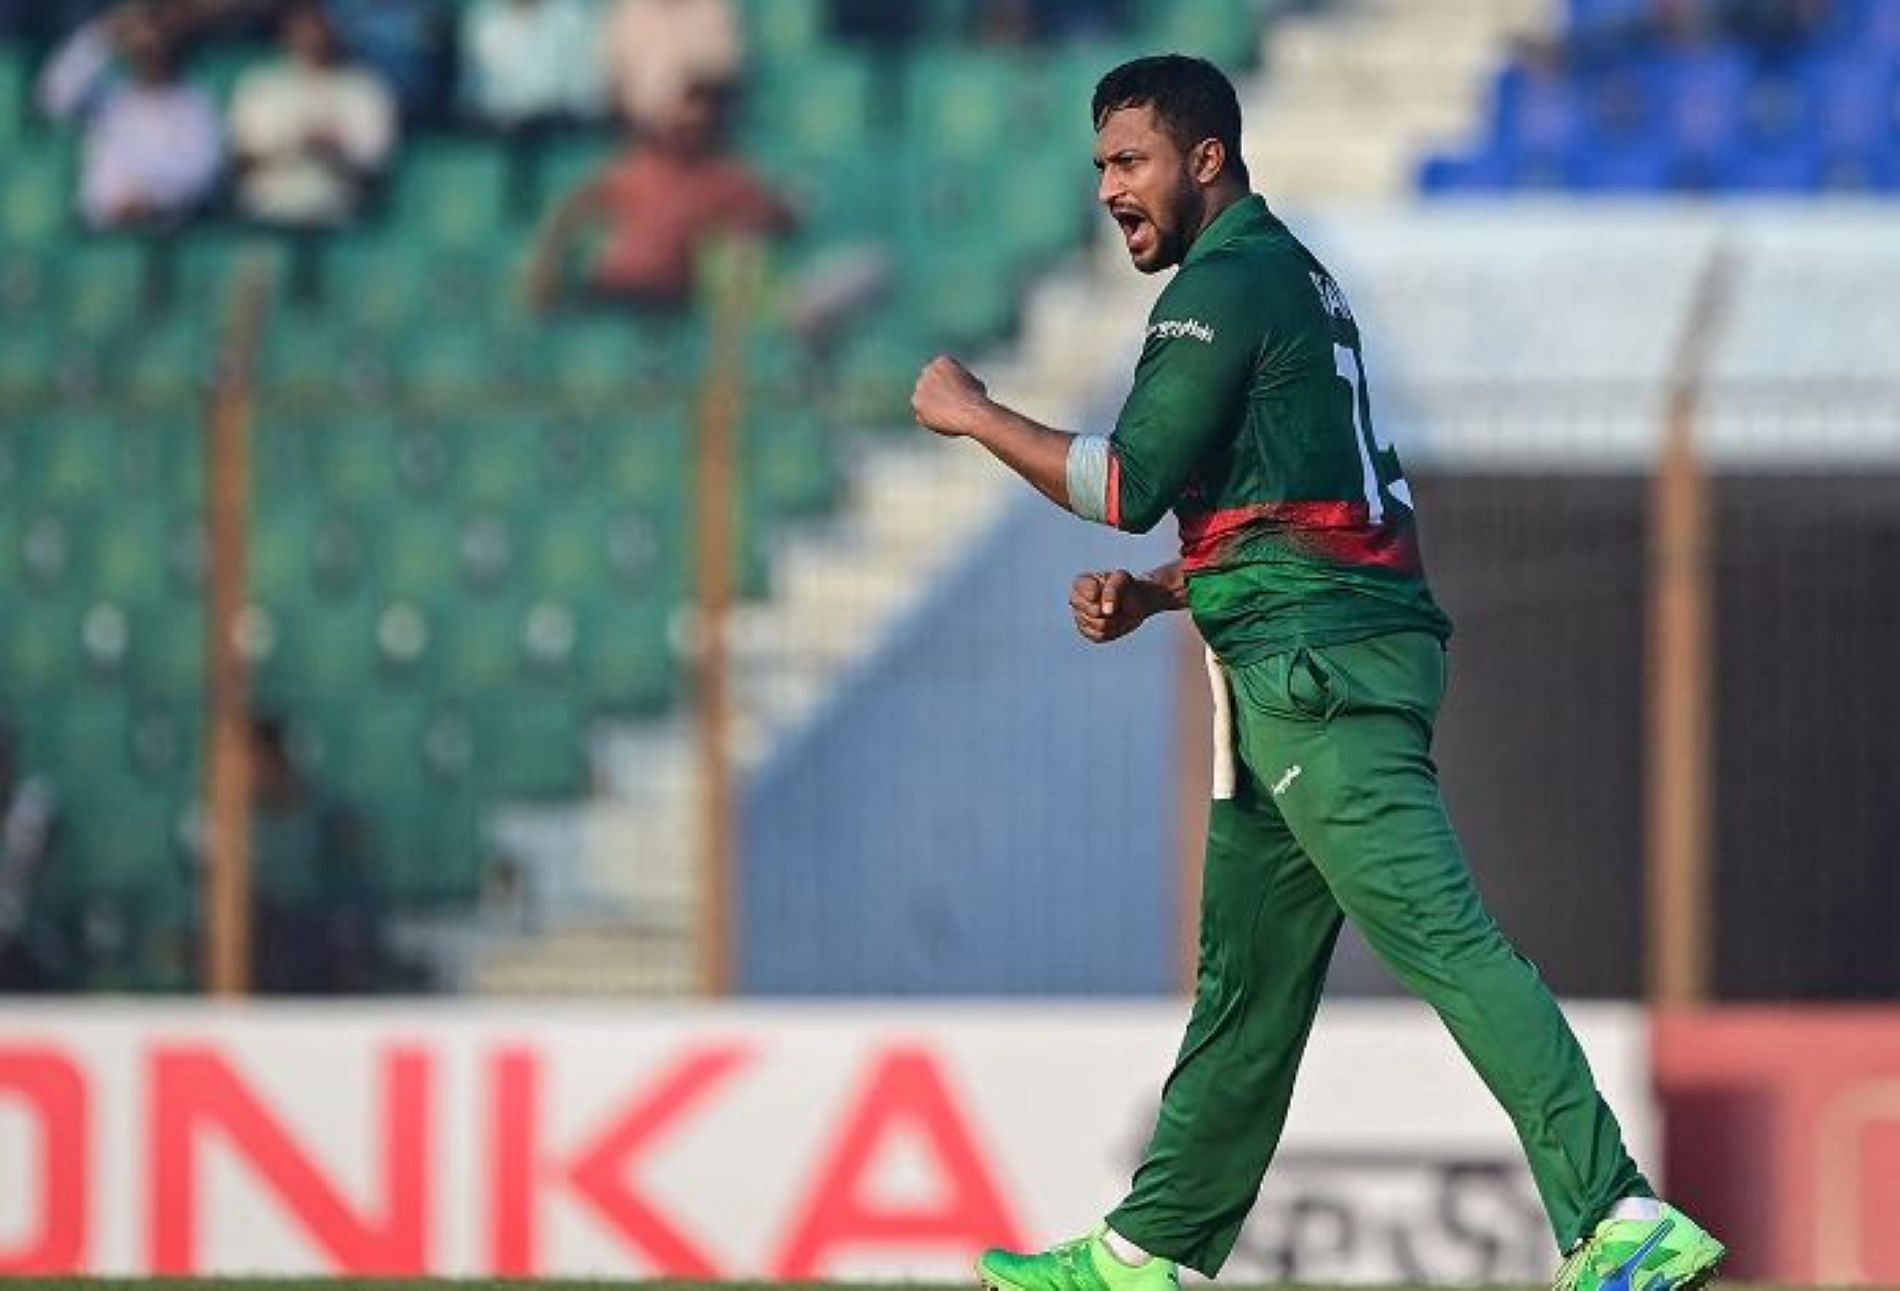 Shakib Al Hasan will be the main threat for Team India in the Bangladesh game.